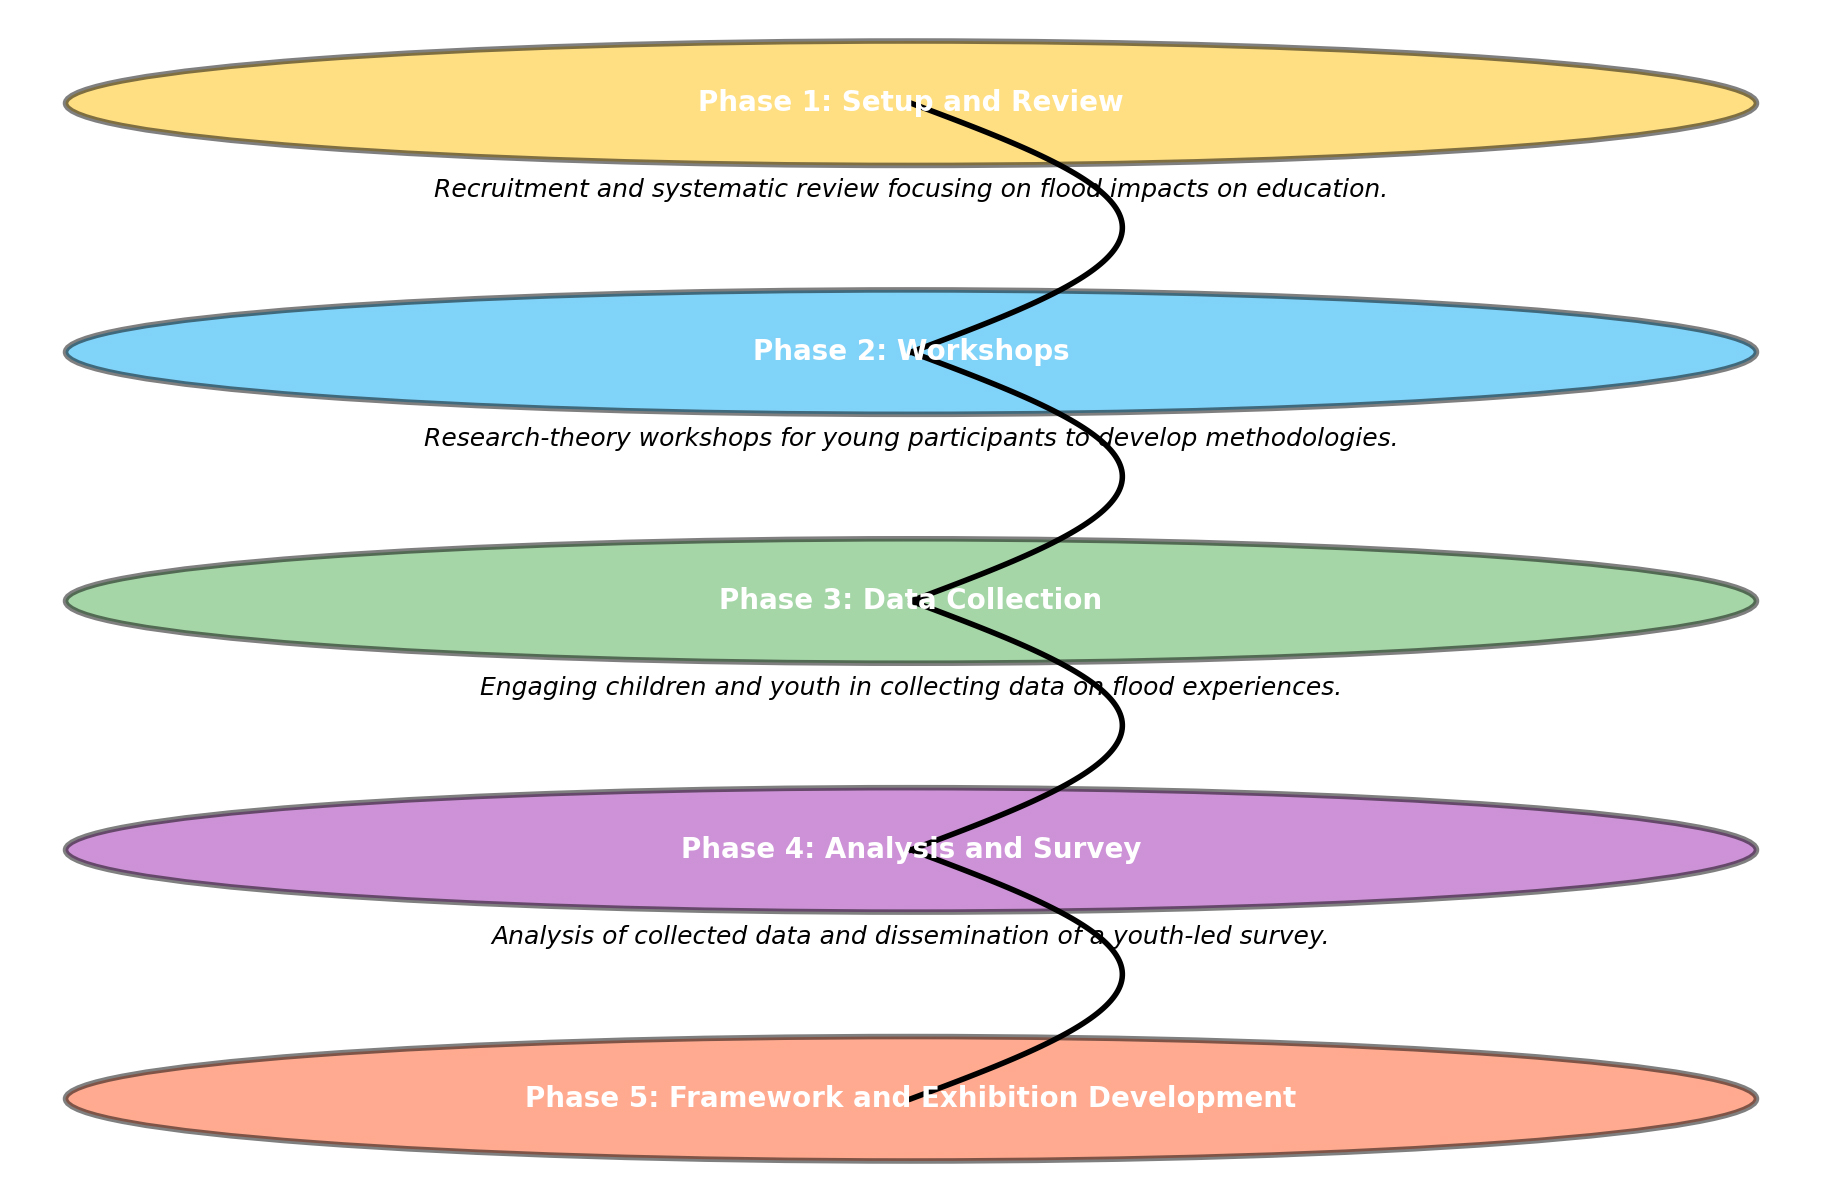 Phases of Floods+Me project